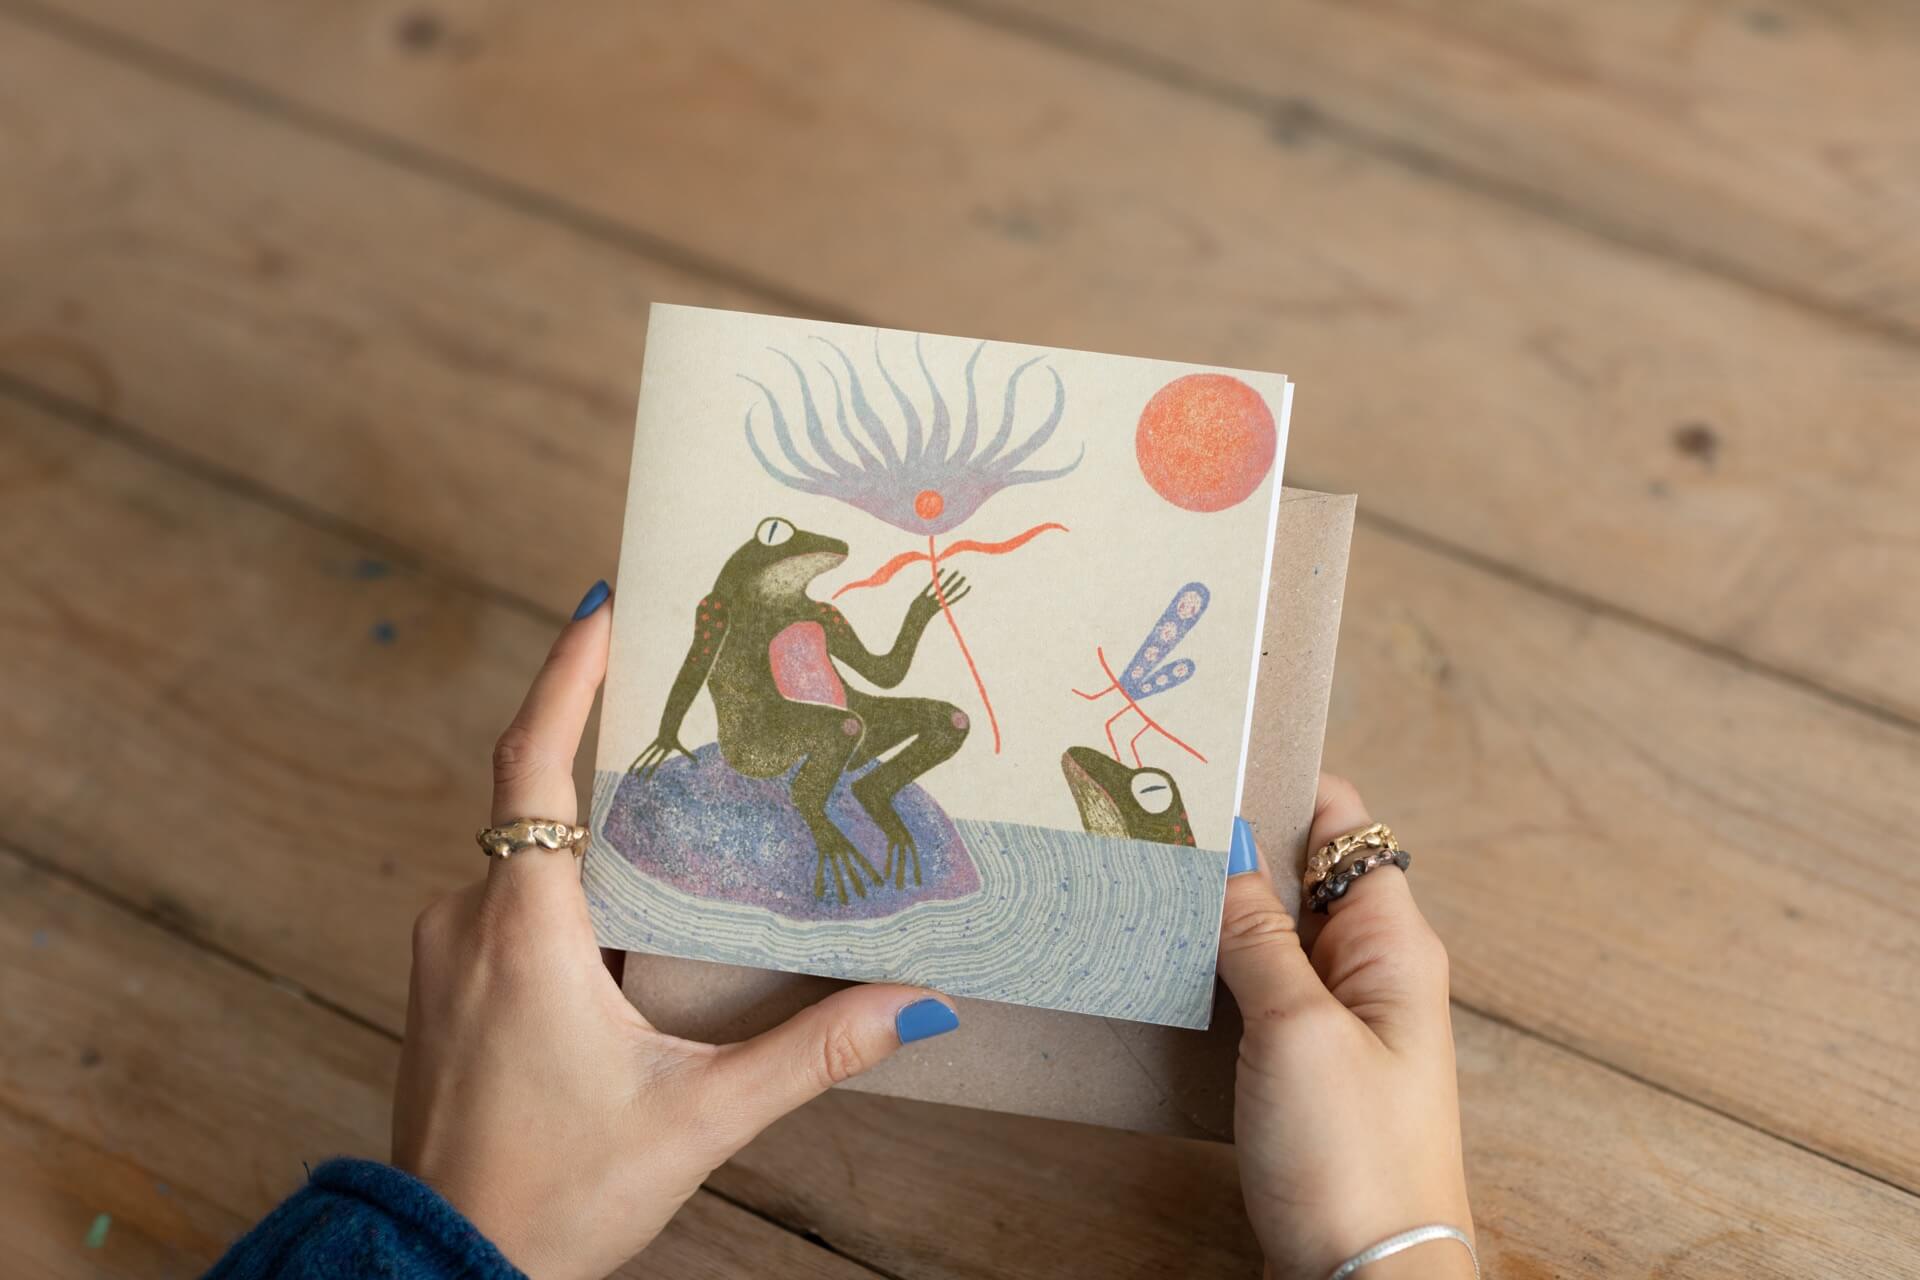 British illustrator Madeleine Kemsley's embroidery inspired greeting cards